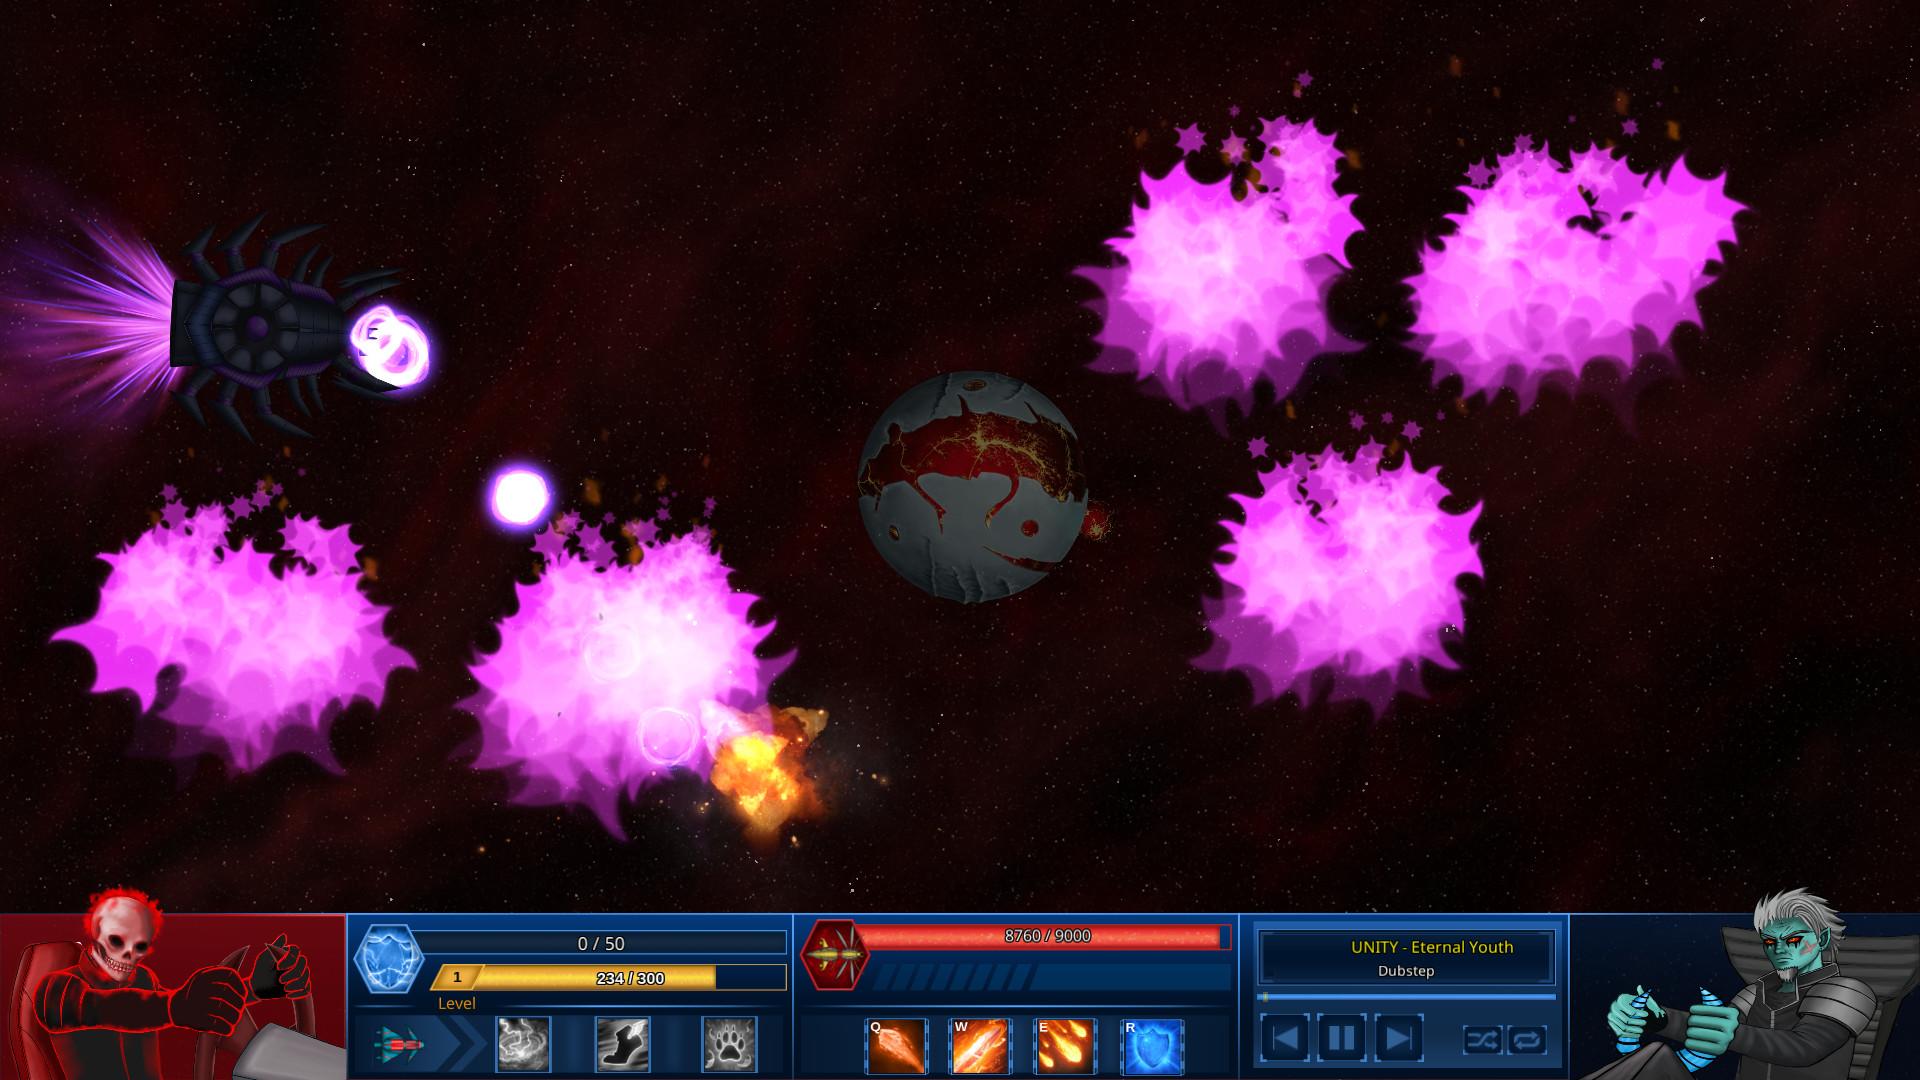 Screenshot №20 from game Survive in Space